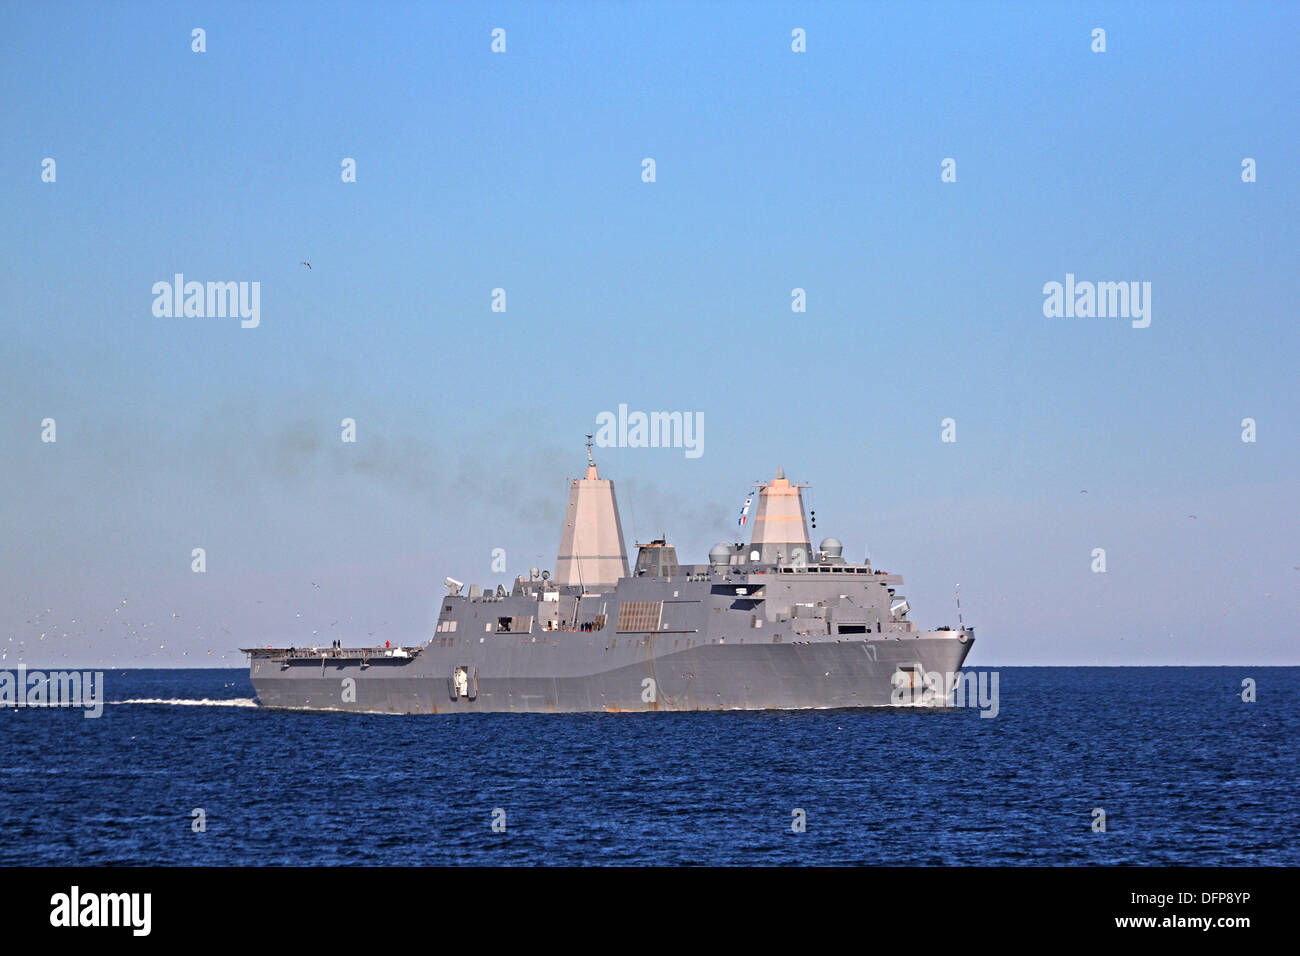 The US Navy USS San Antonio amphibious transport dock ship during operations January 29, 2012 in the Atlantic Ocean. Terrorist Abu Anas al Libi is currently being held on the San Antonio after his capture October 5, 2013 in Libya. Stock Photo